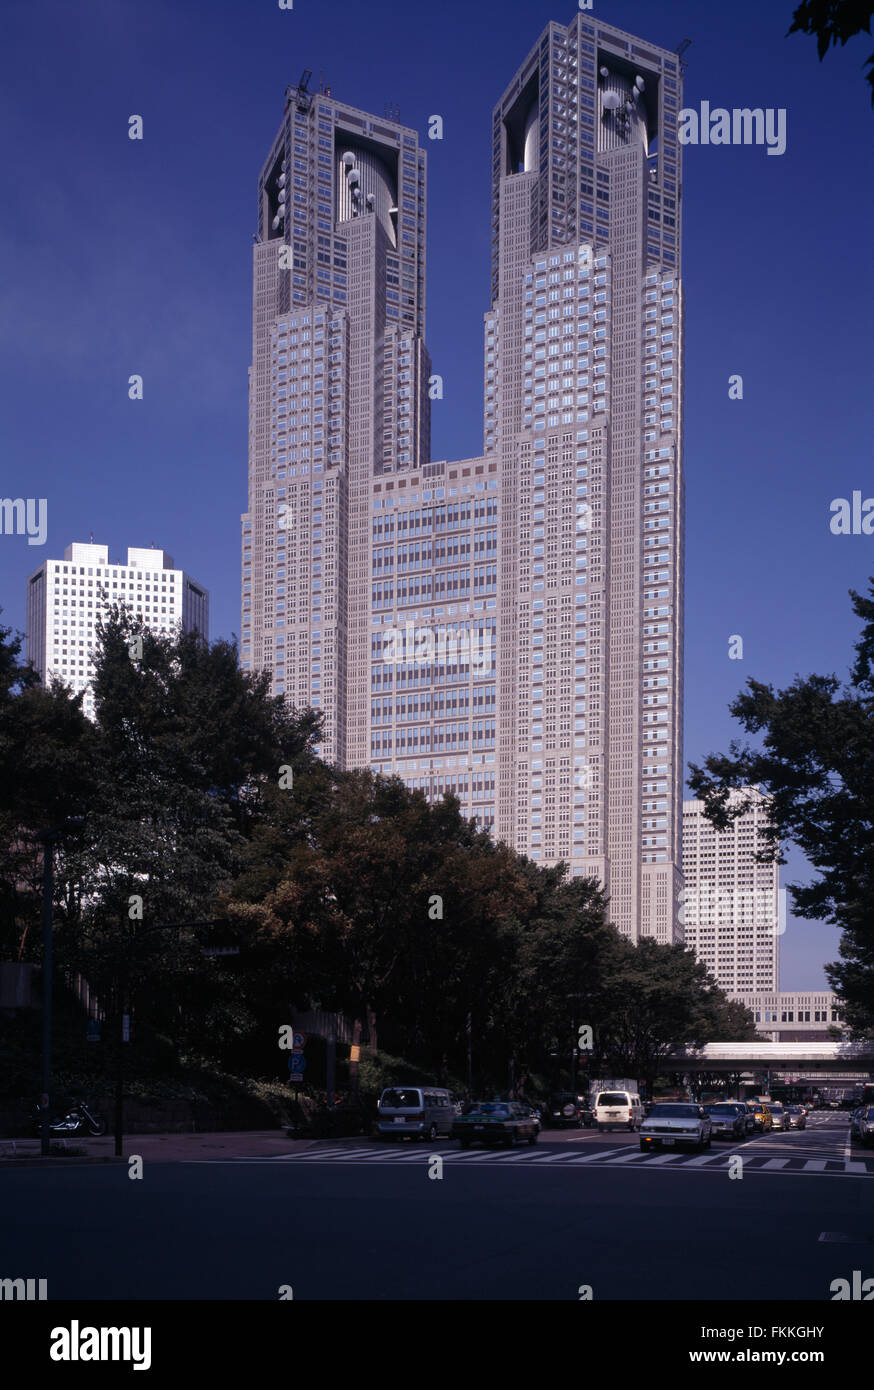 A view of the New City Hall in Shinjuku, Tokyo. A tall building in the dusk. Stock Photo